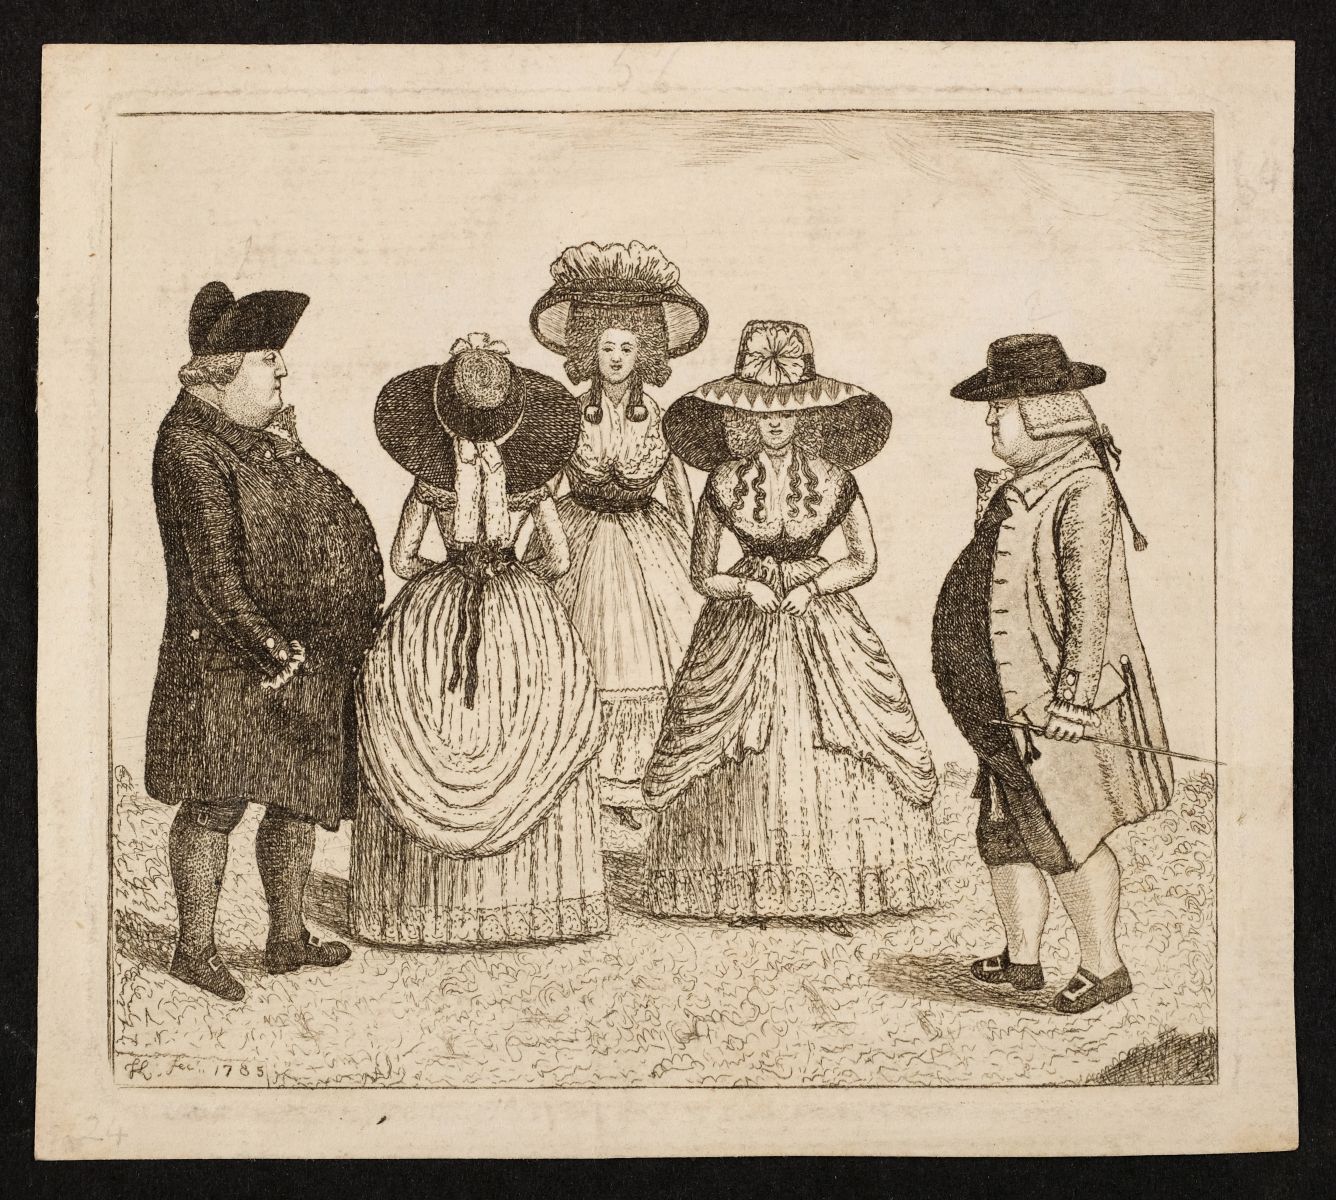 Tight Lacing or Hold Fast Behind. Artist and publisher: Matthew Darly  (British, ca. 1720-80 London) , London. Dimensions: plate: 13 3/4 x 9 11/16  in. (35 x 24.6 cm) sheet: 17 13/16